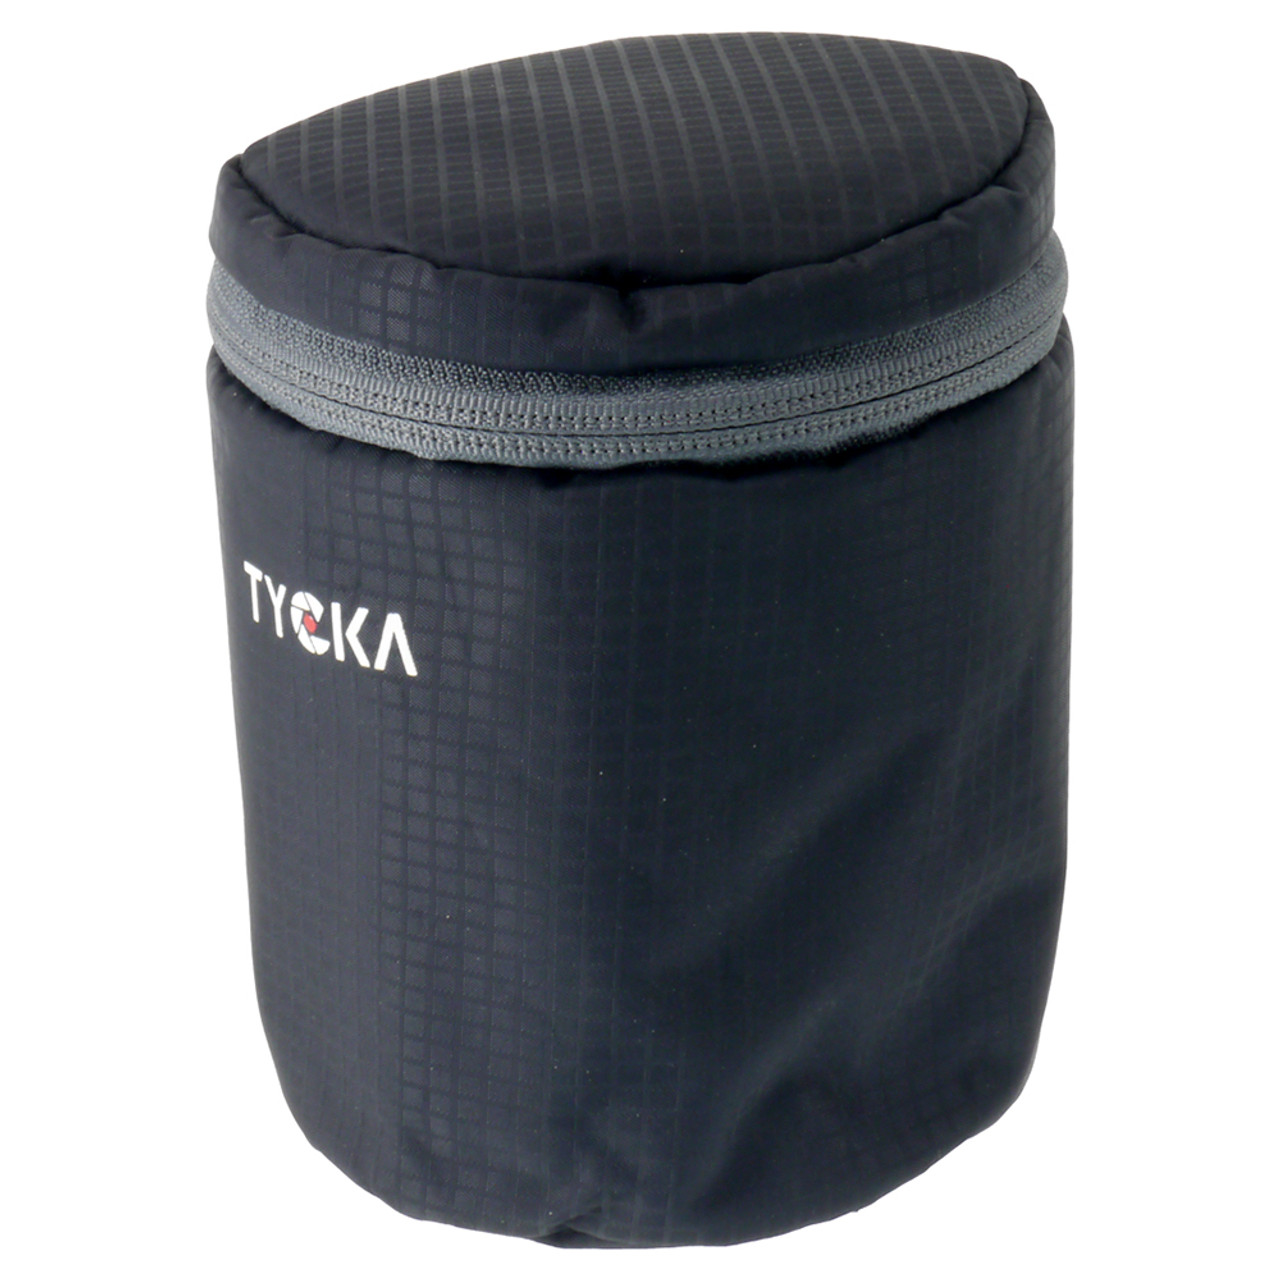 USED TYCKA LENS POUCH